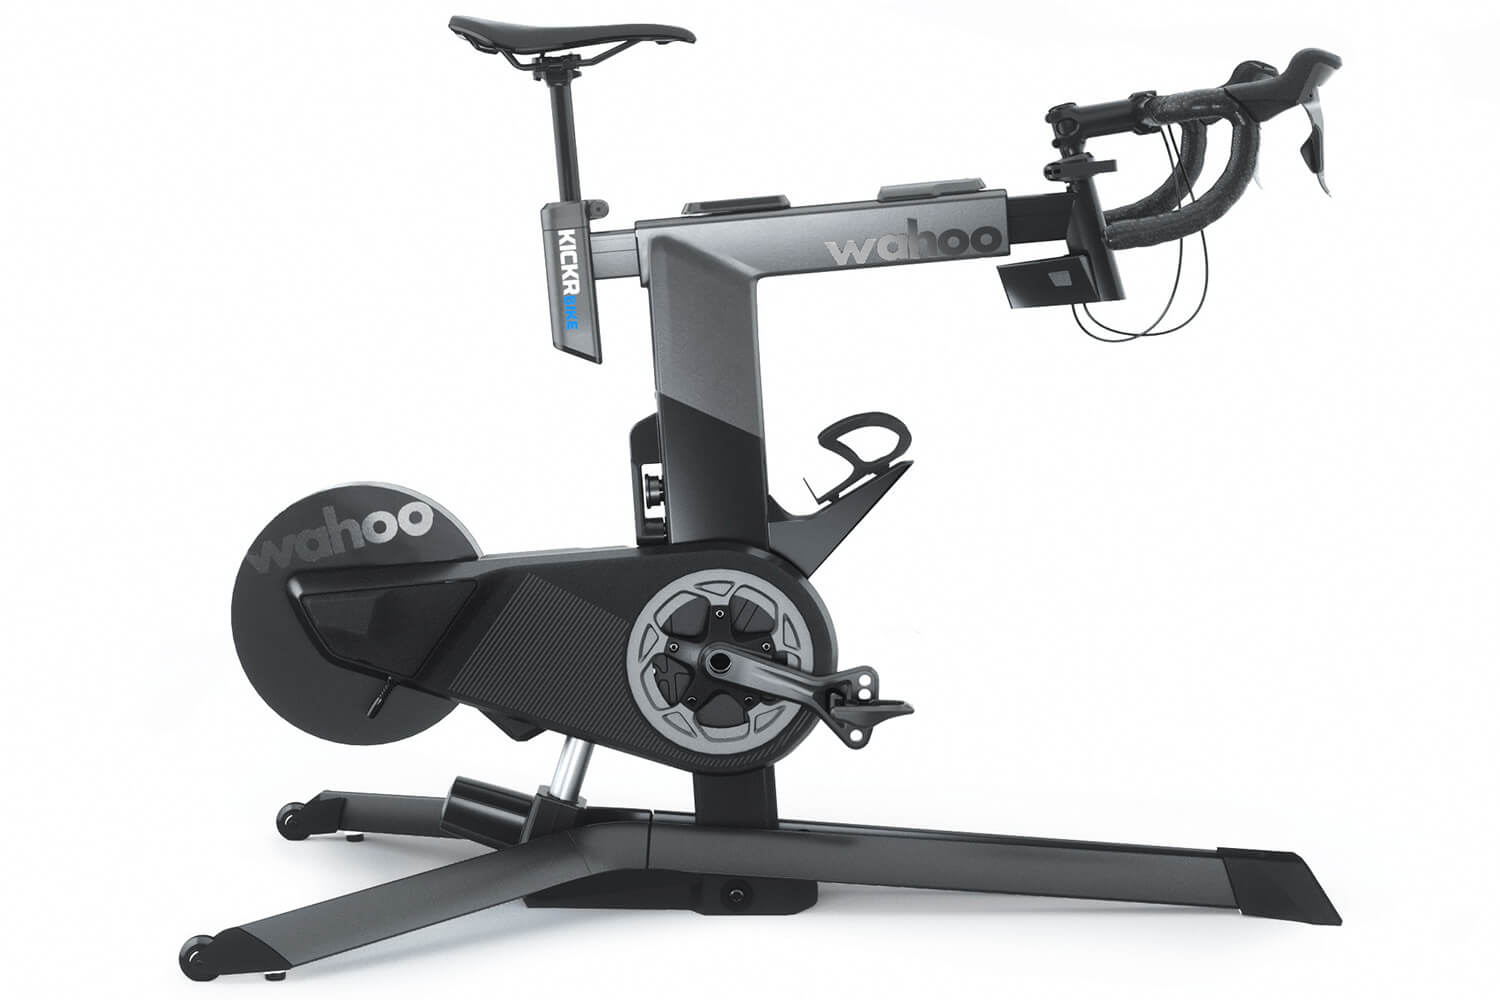 The Wahoo Smart Trainer Buyer's Guide